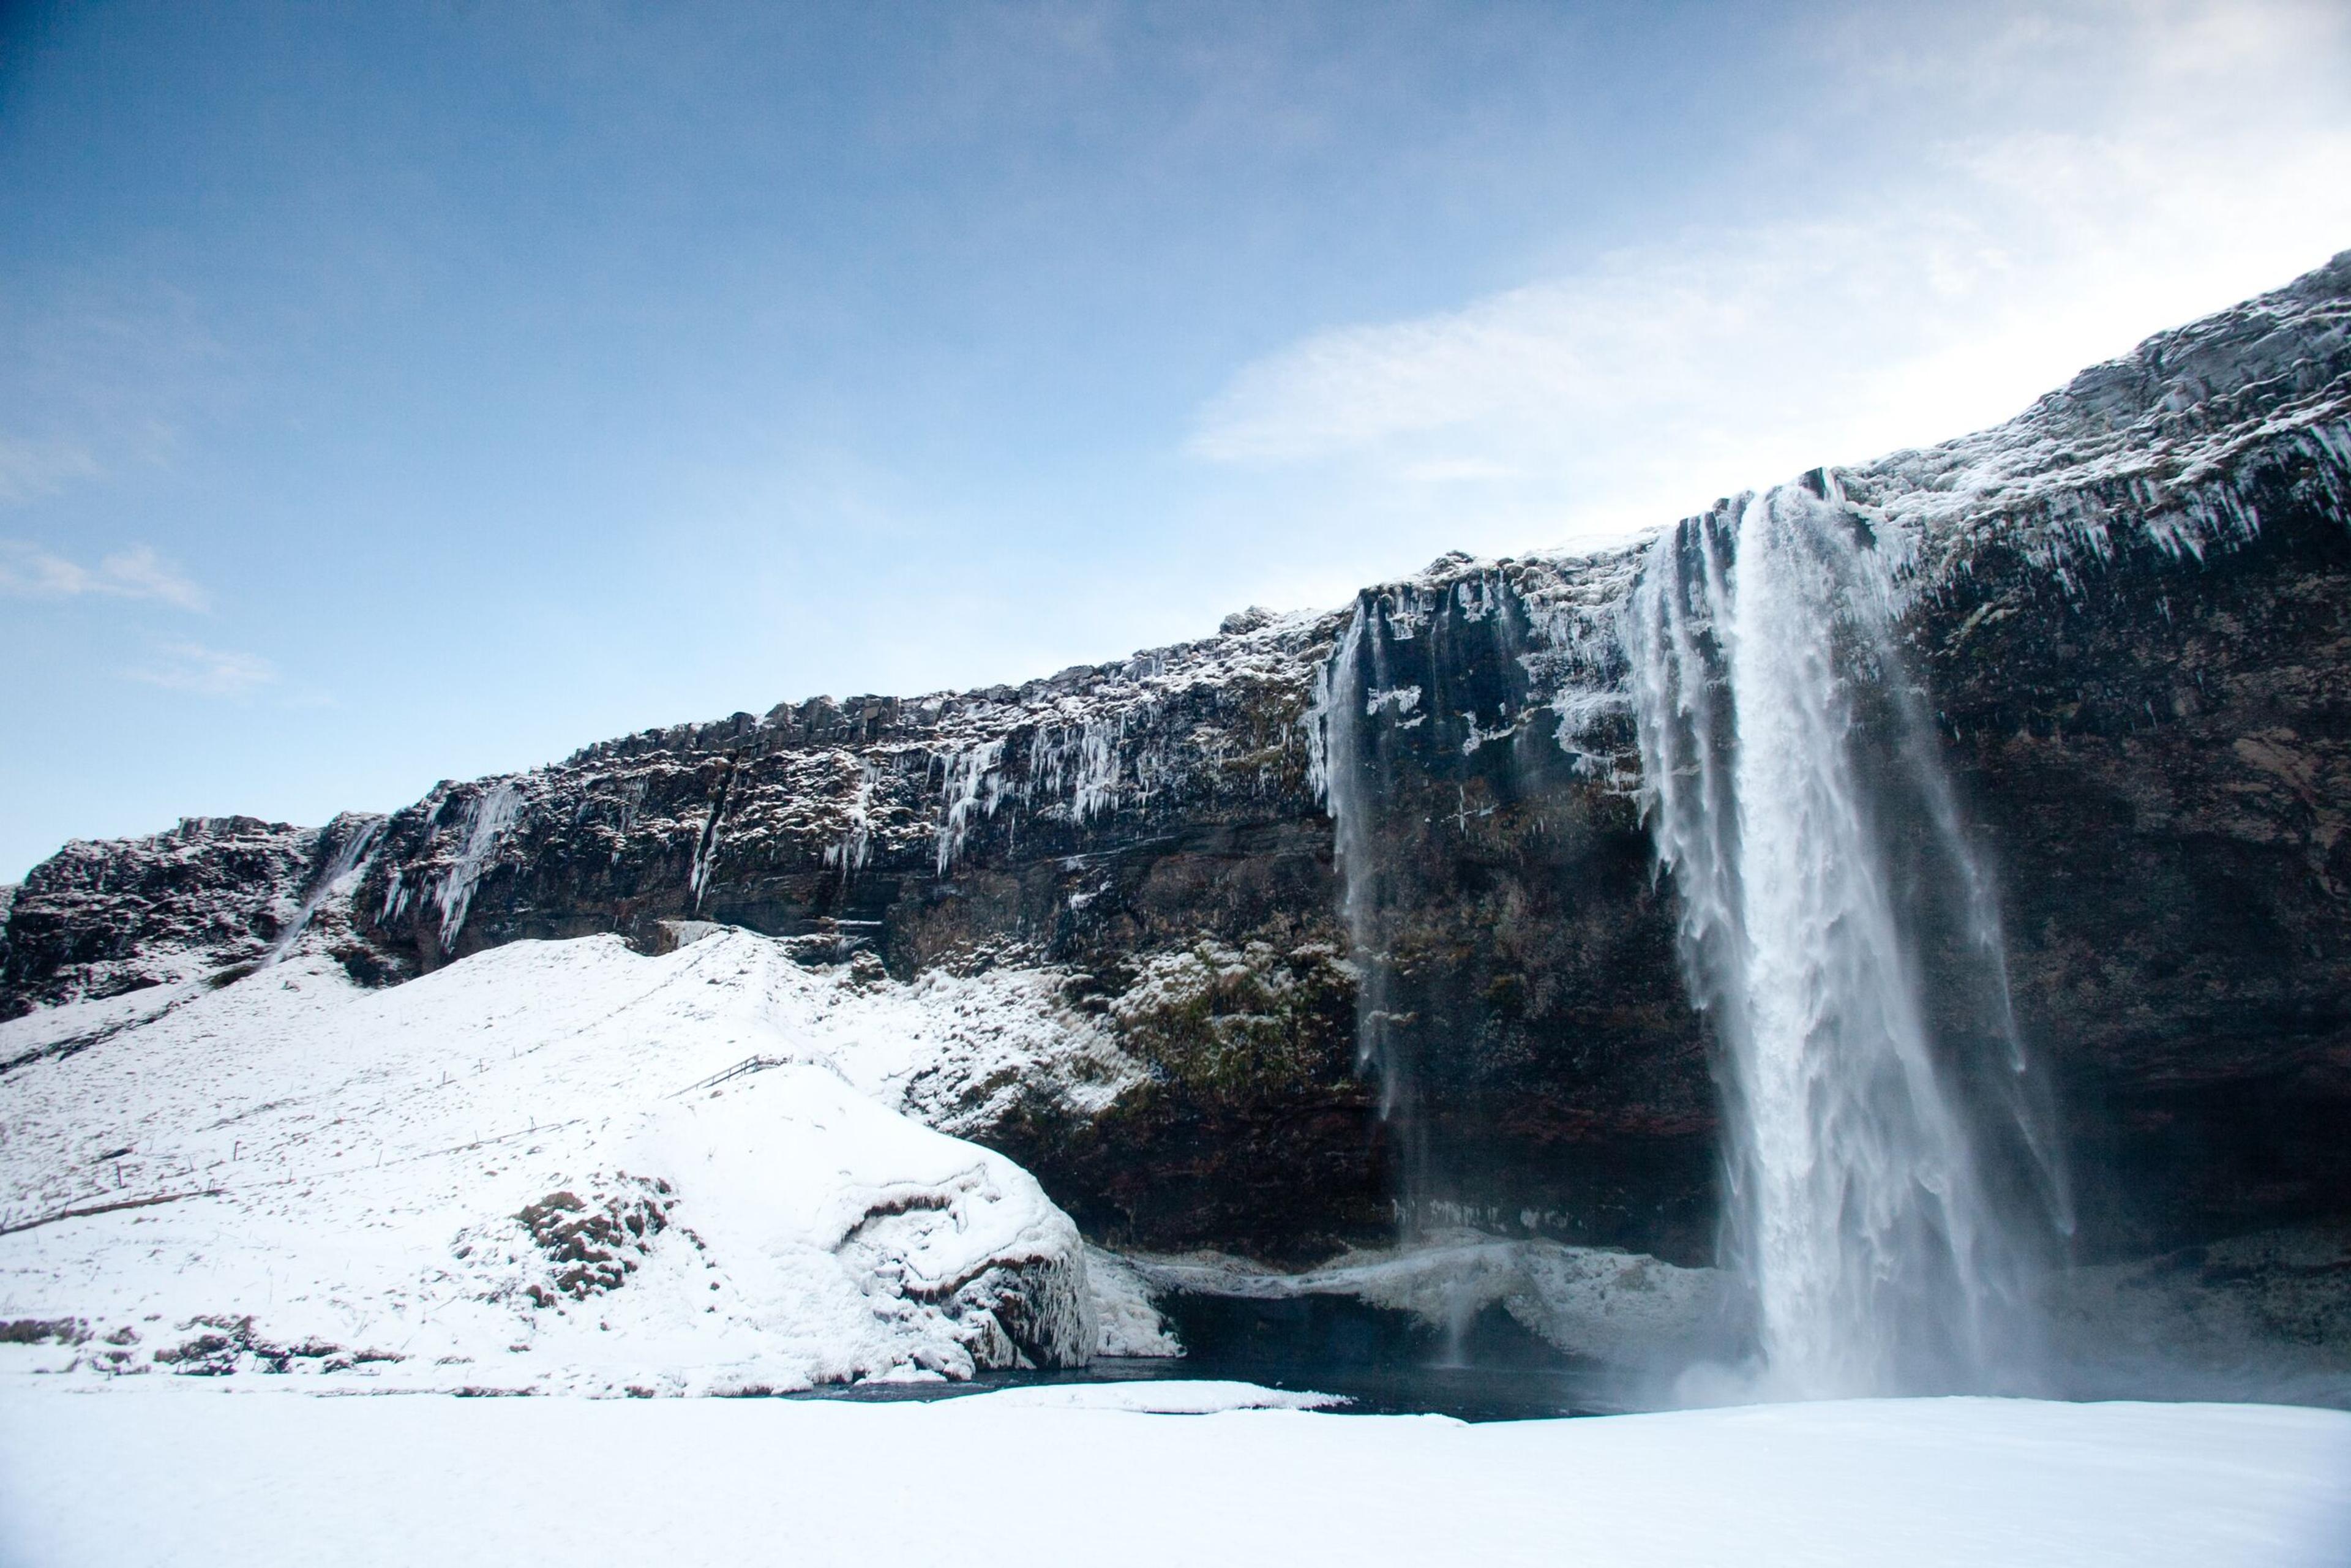 A snowy scene with a powerful waterfall plunging over a cliff against a clear blue sky, with ice and snow covering the surrounding landscape.